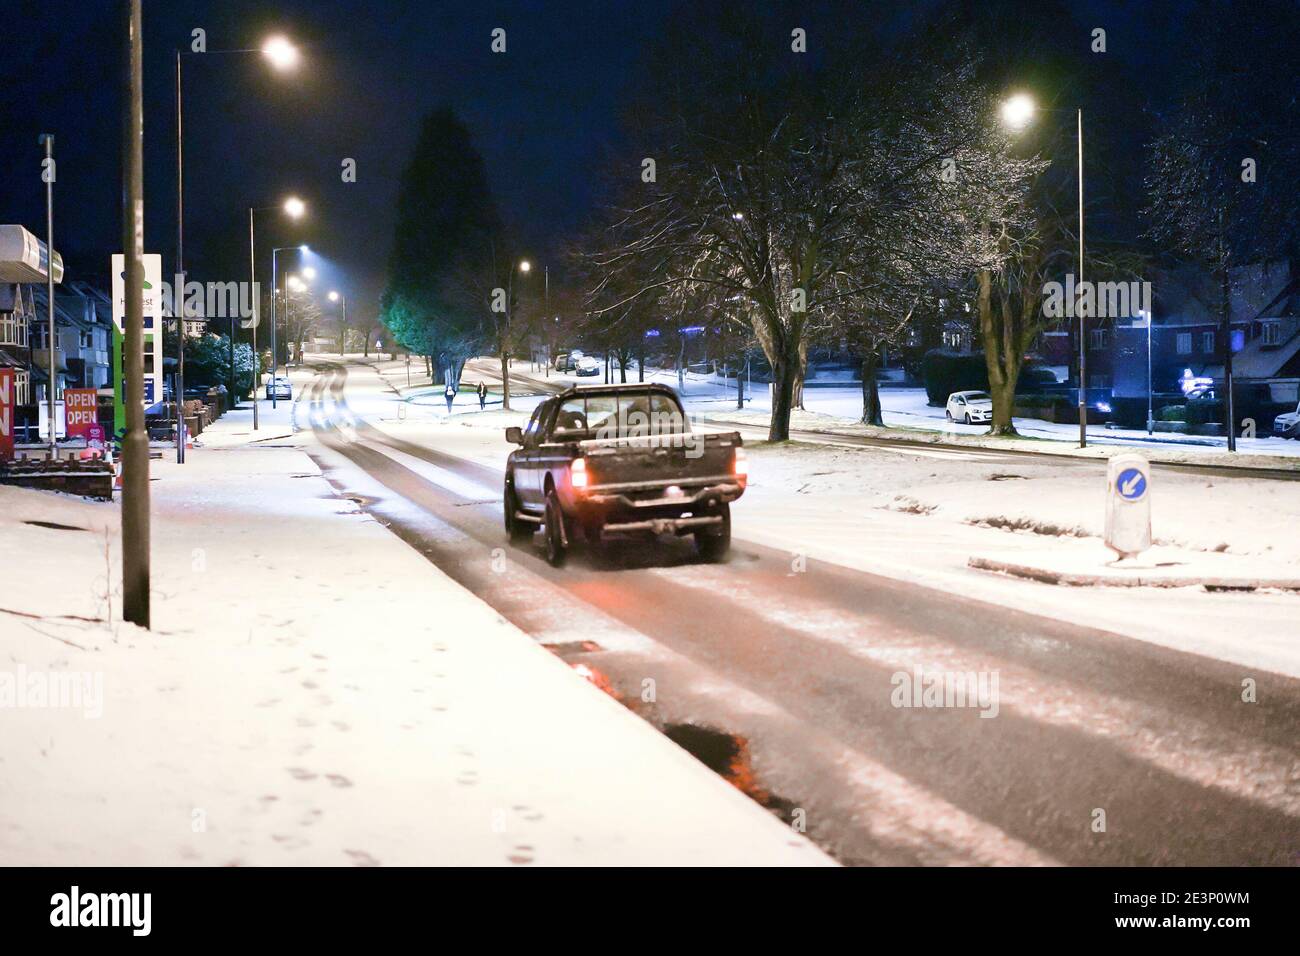 Kidderminster, UK. 2nd January, 2021. UK weather: with daytime temperatures failing to rise much above freezing across Worcestshire and roads already icy, Kidderminster is hit with yet more snow showers. Little traffic can be seen on the snow covered roads at night.  Credit: Lee Hudson Stock Photo